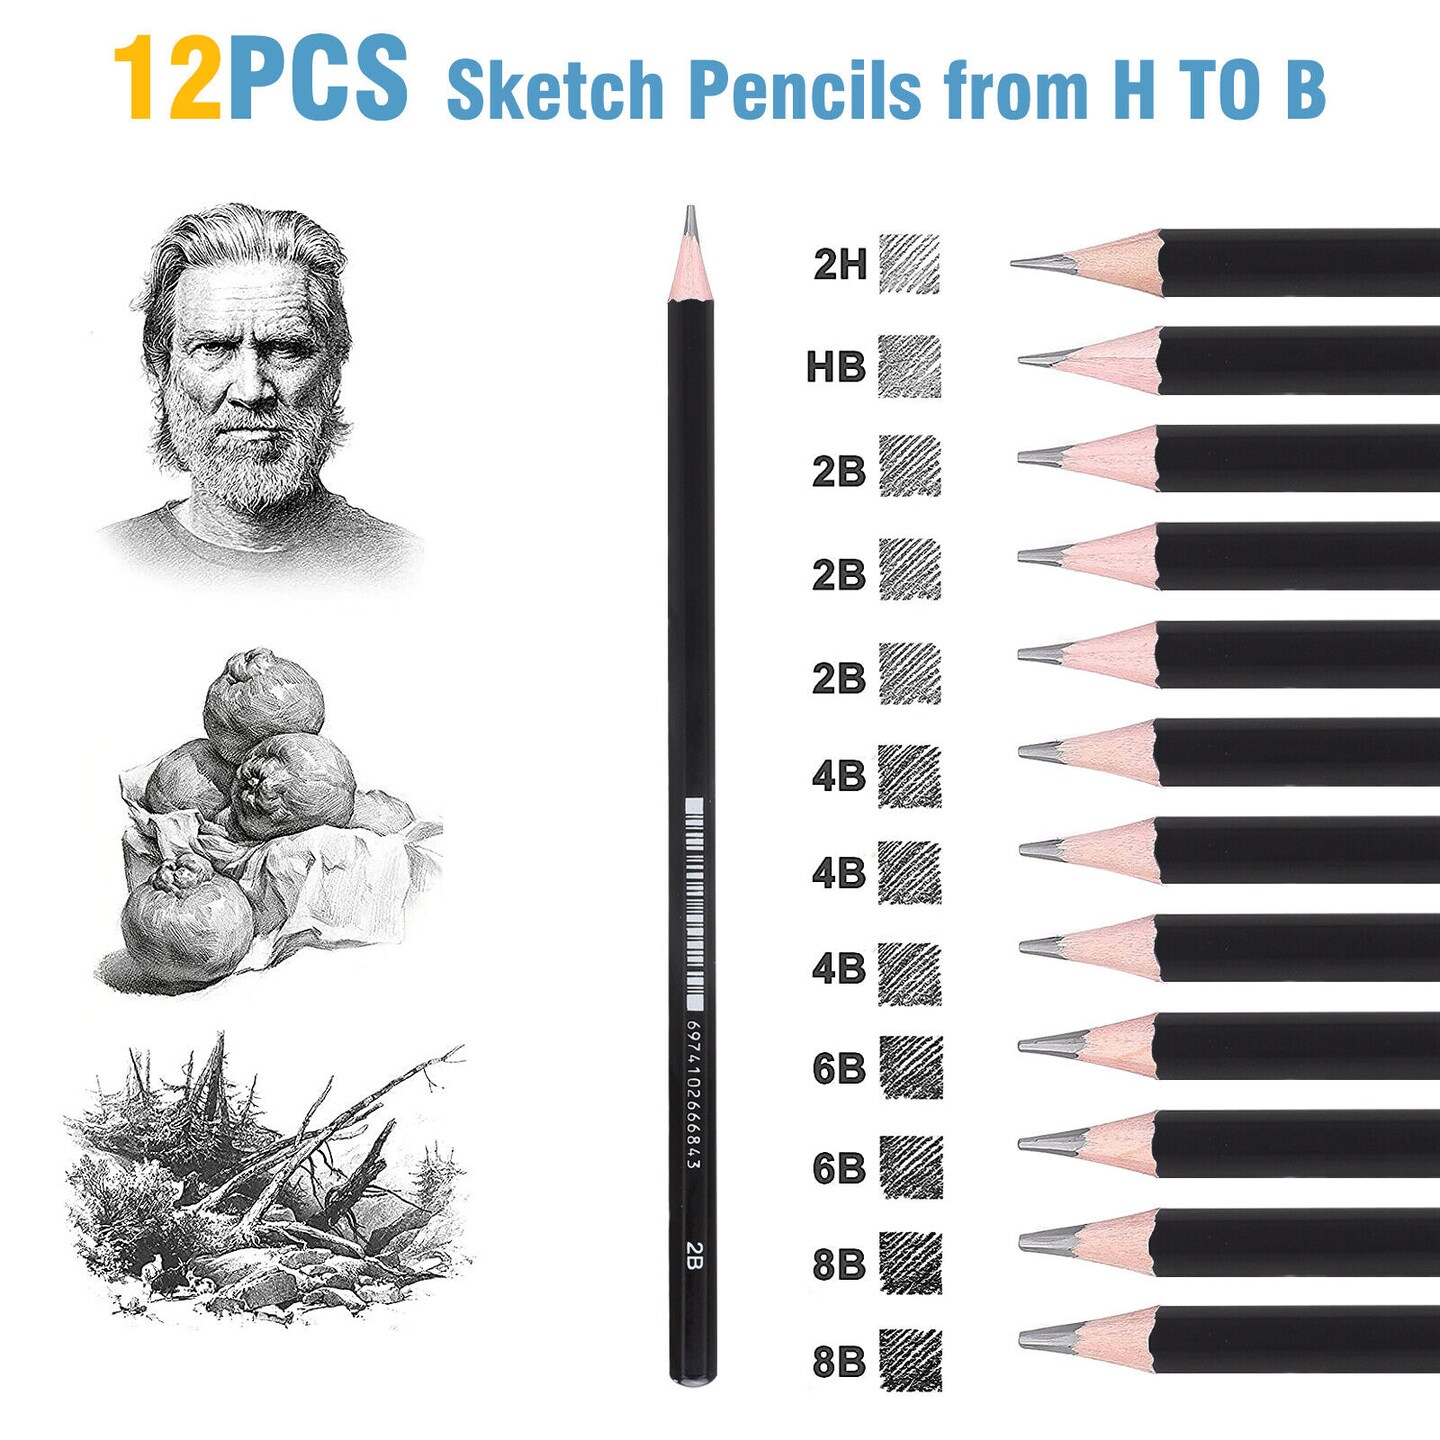 Professional Drawing Artist Pencil Kit with Sketch Charcoal Tools 22pcs